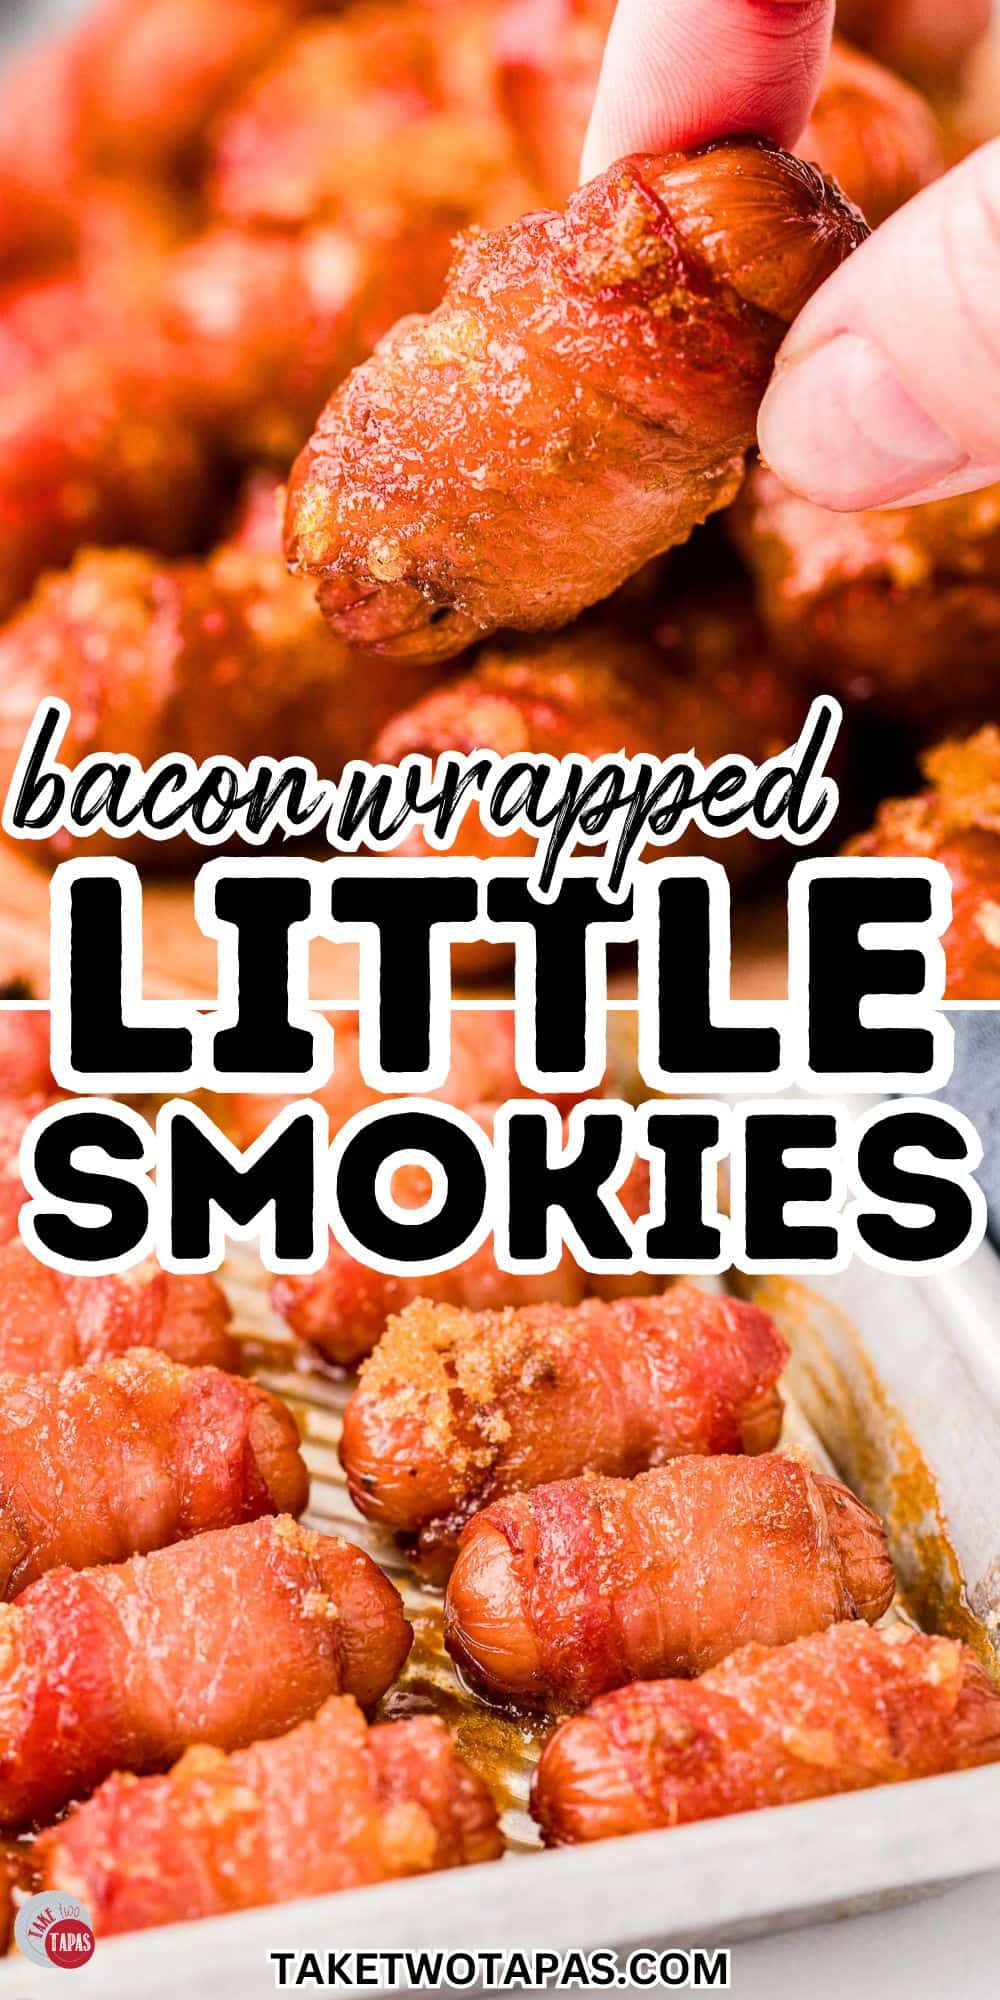 bacon wrapped little smokies picture collage